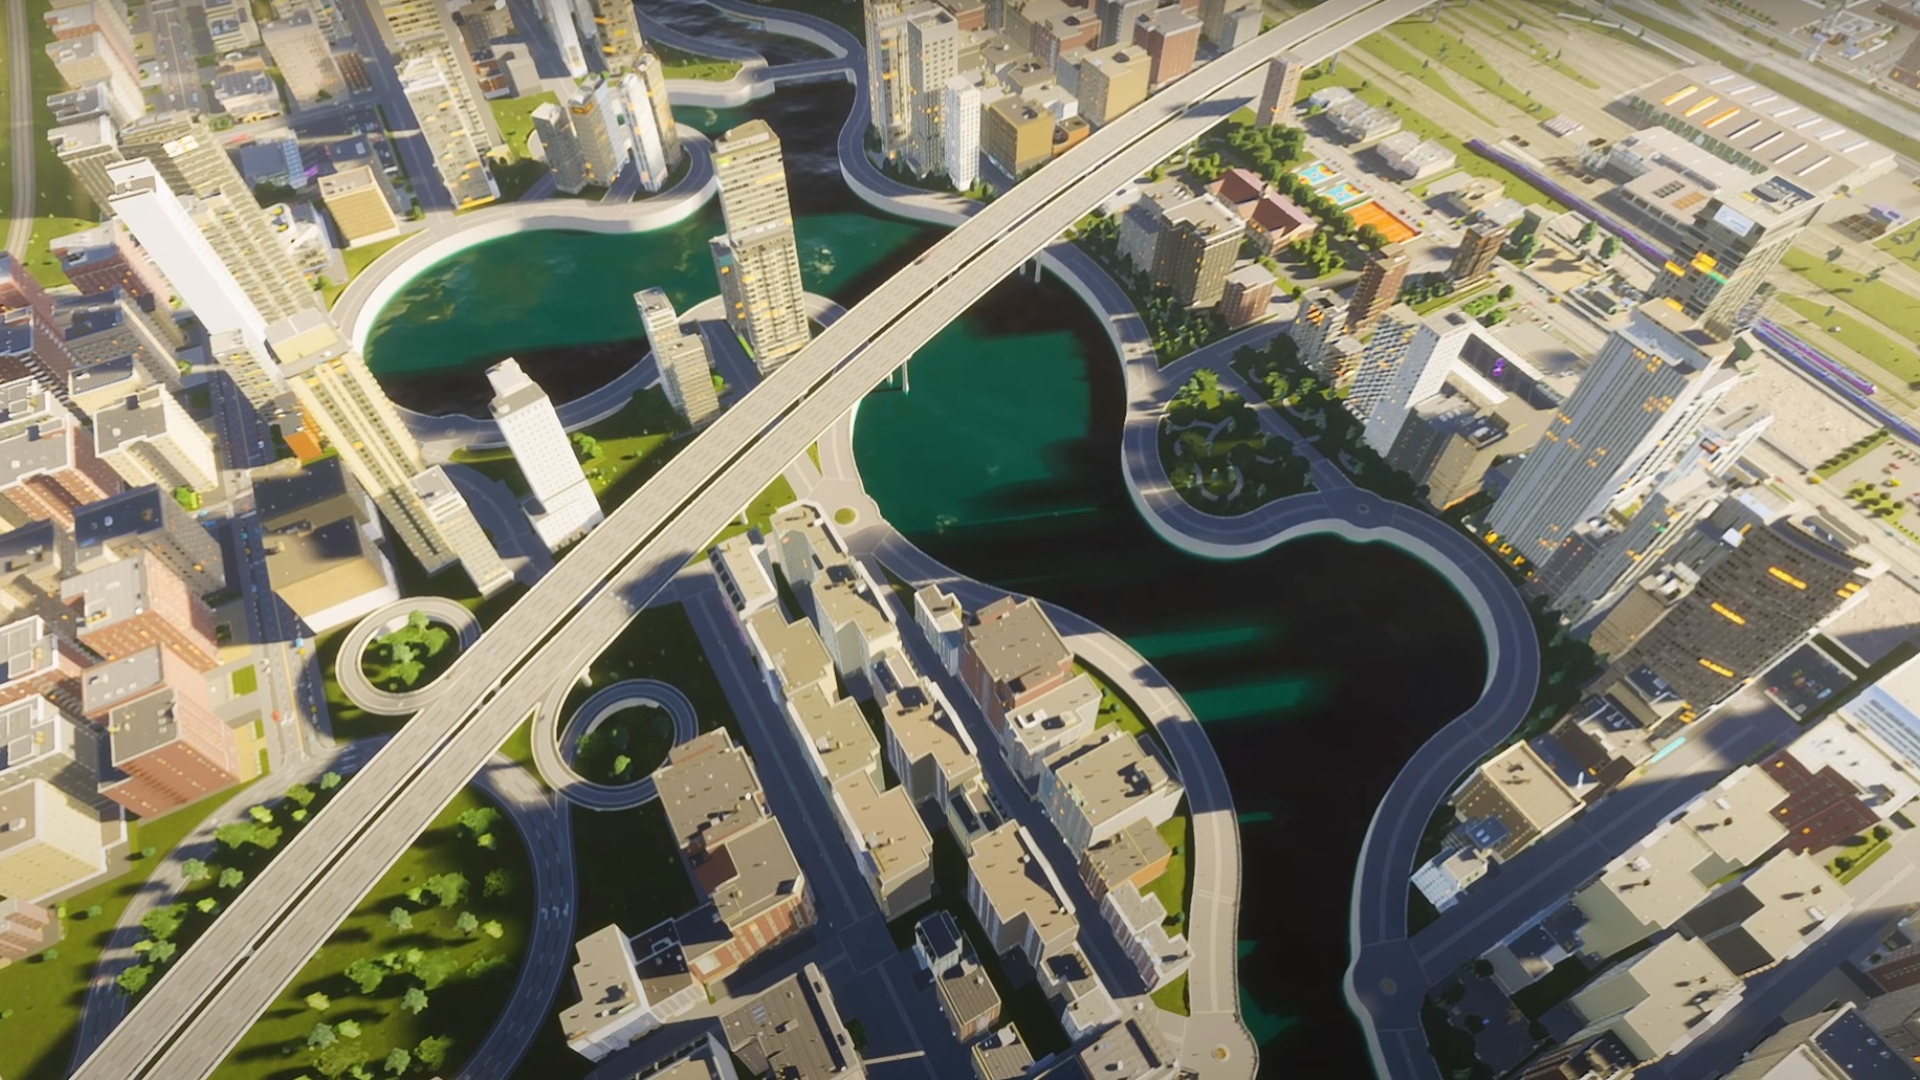 Cities: Skylines 2 Could Refurbush the Best Parts of SimCity 2013 - News -  Simtropolis